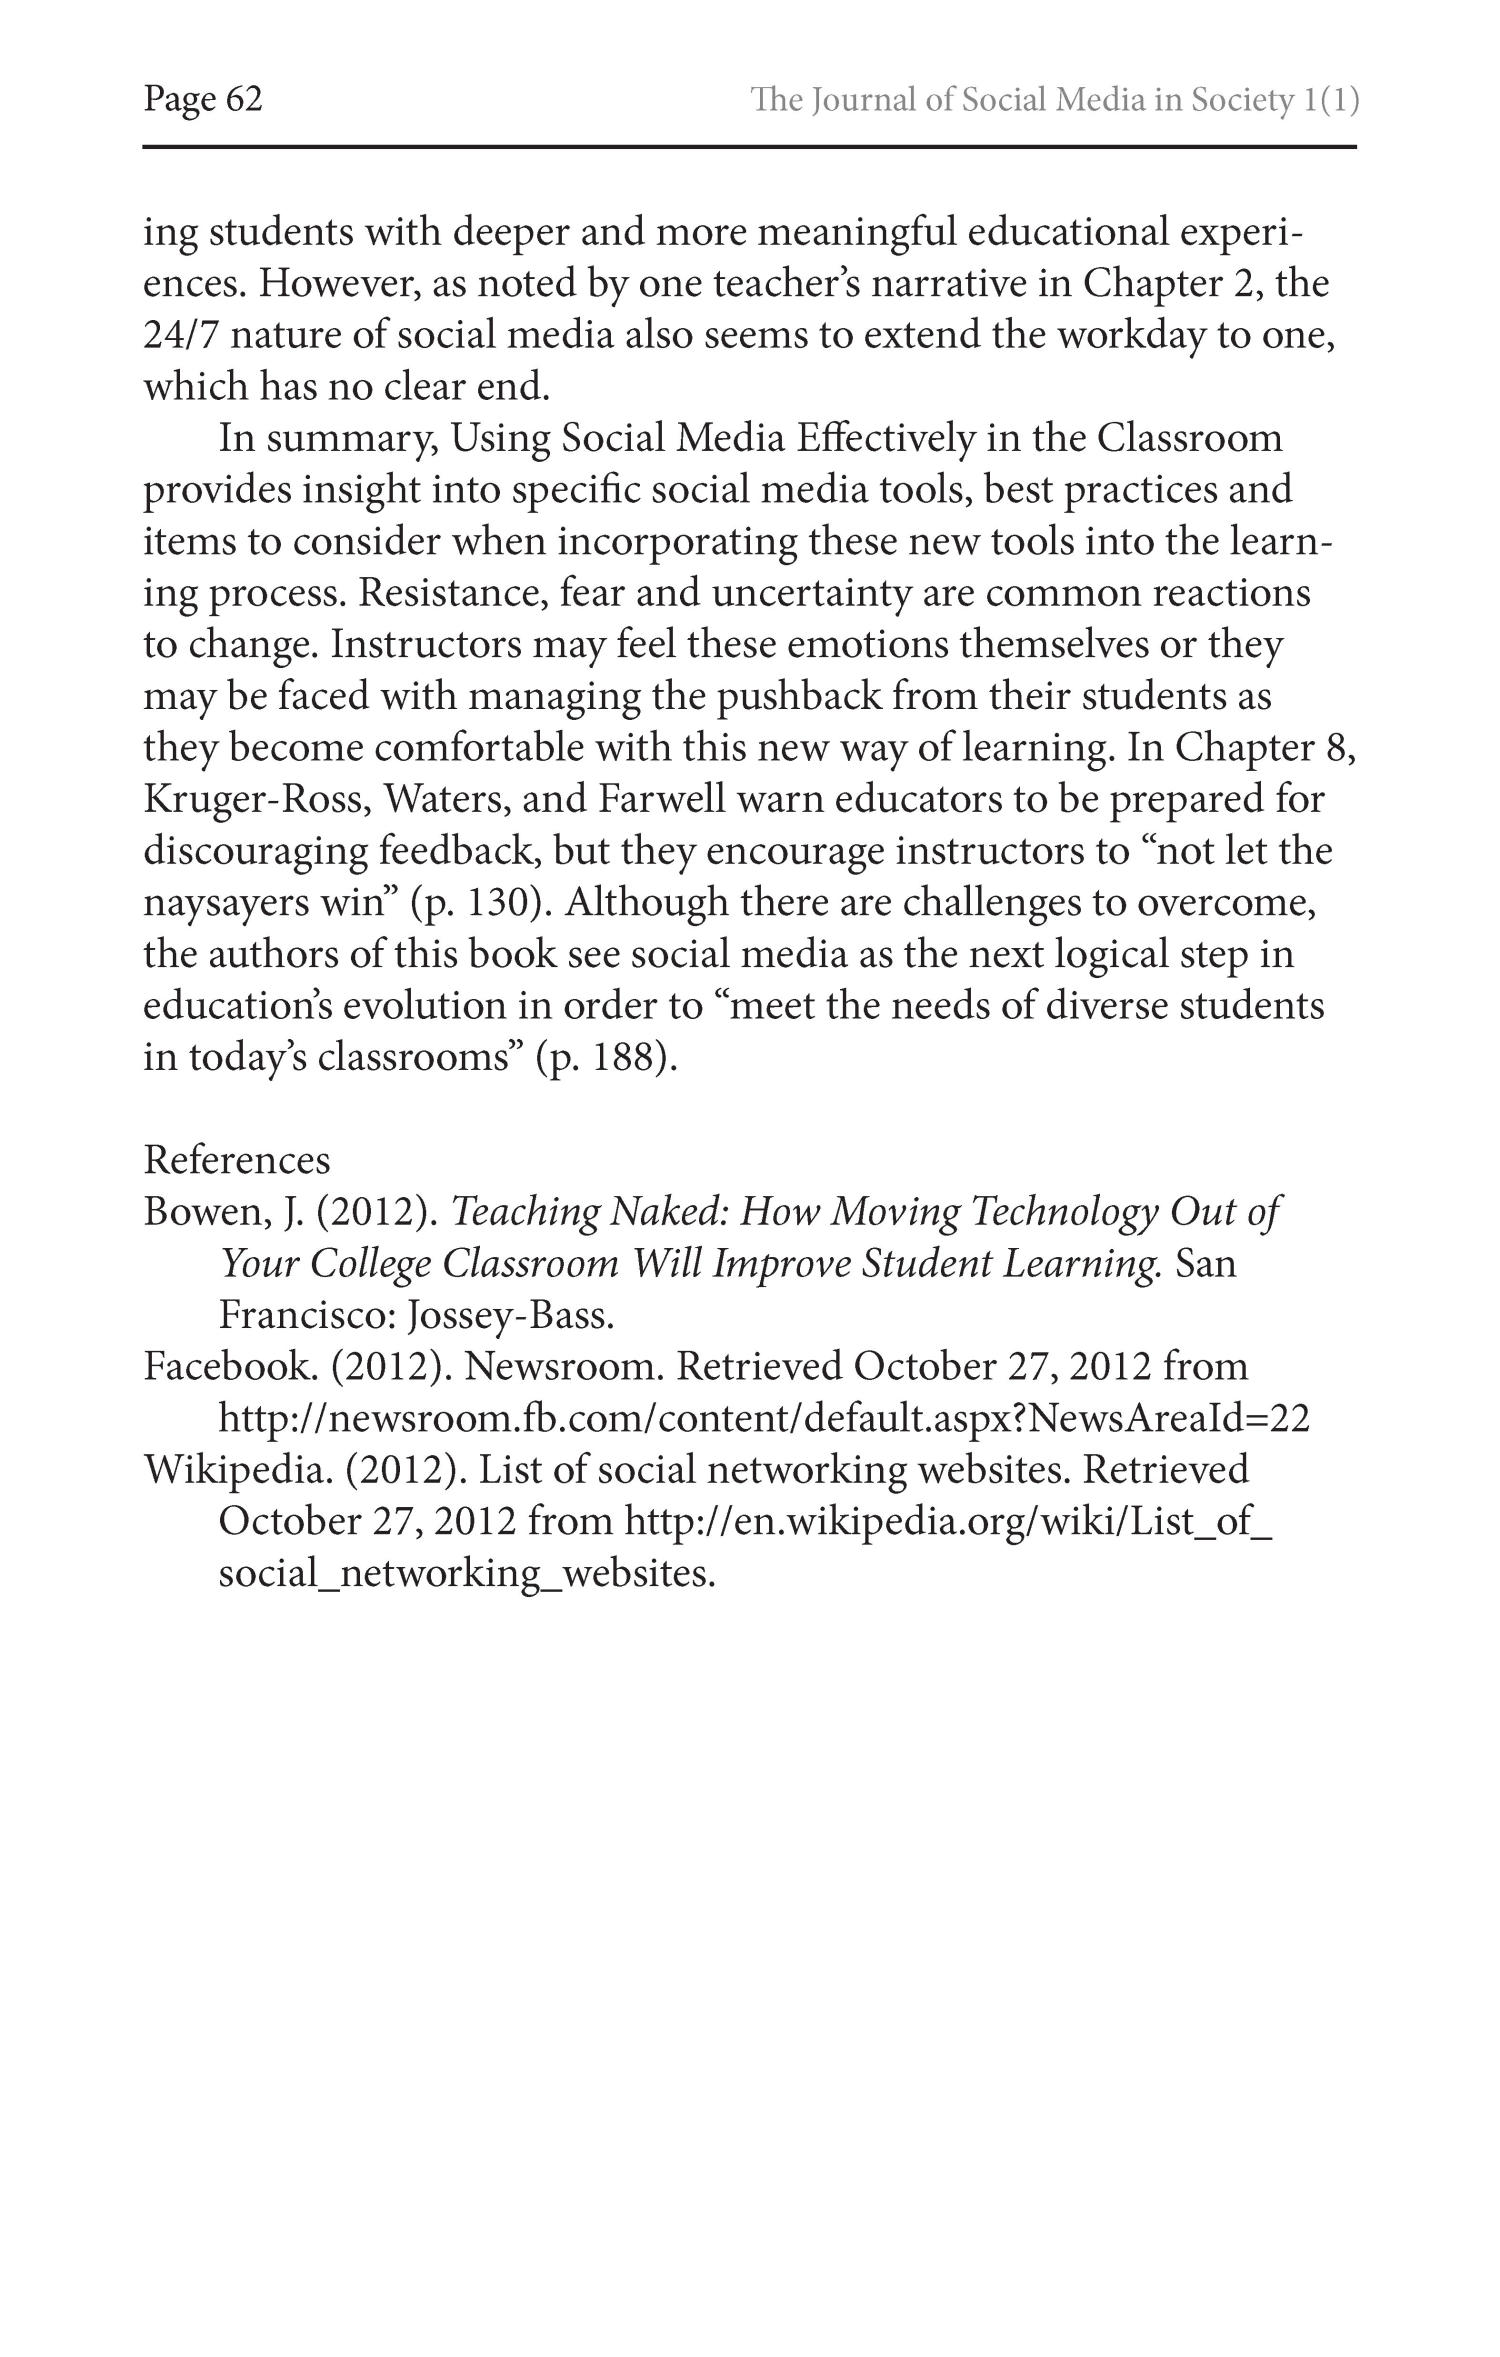 Book Review: Using Social Media Effectively in the Classroom: Blogs, Wikis,  Twitter, and More. - Page 62 - UNT Digital Library